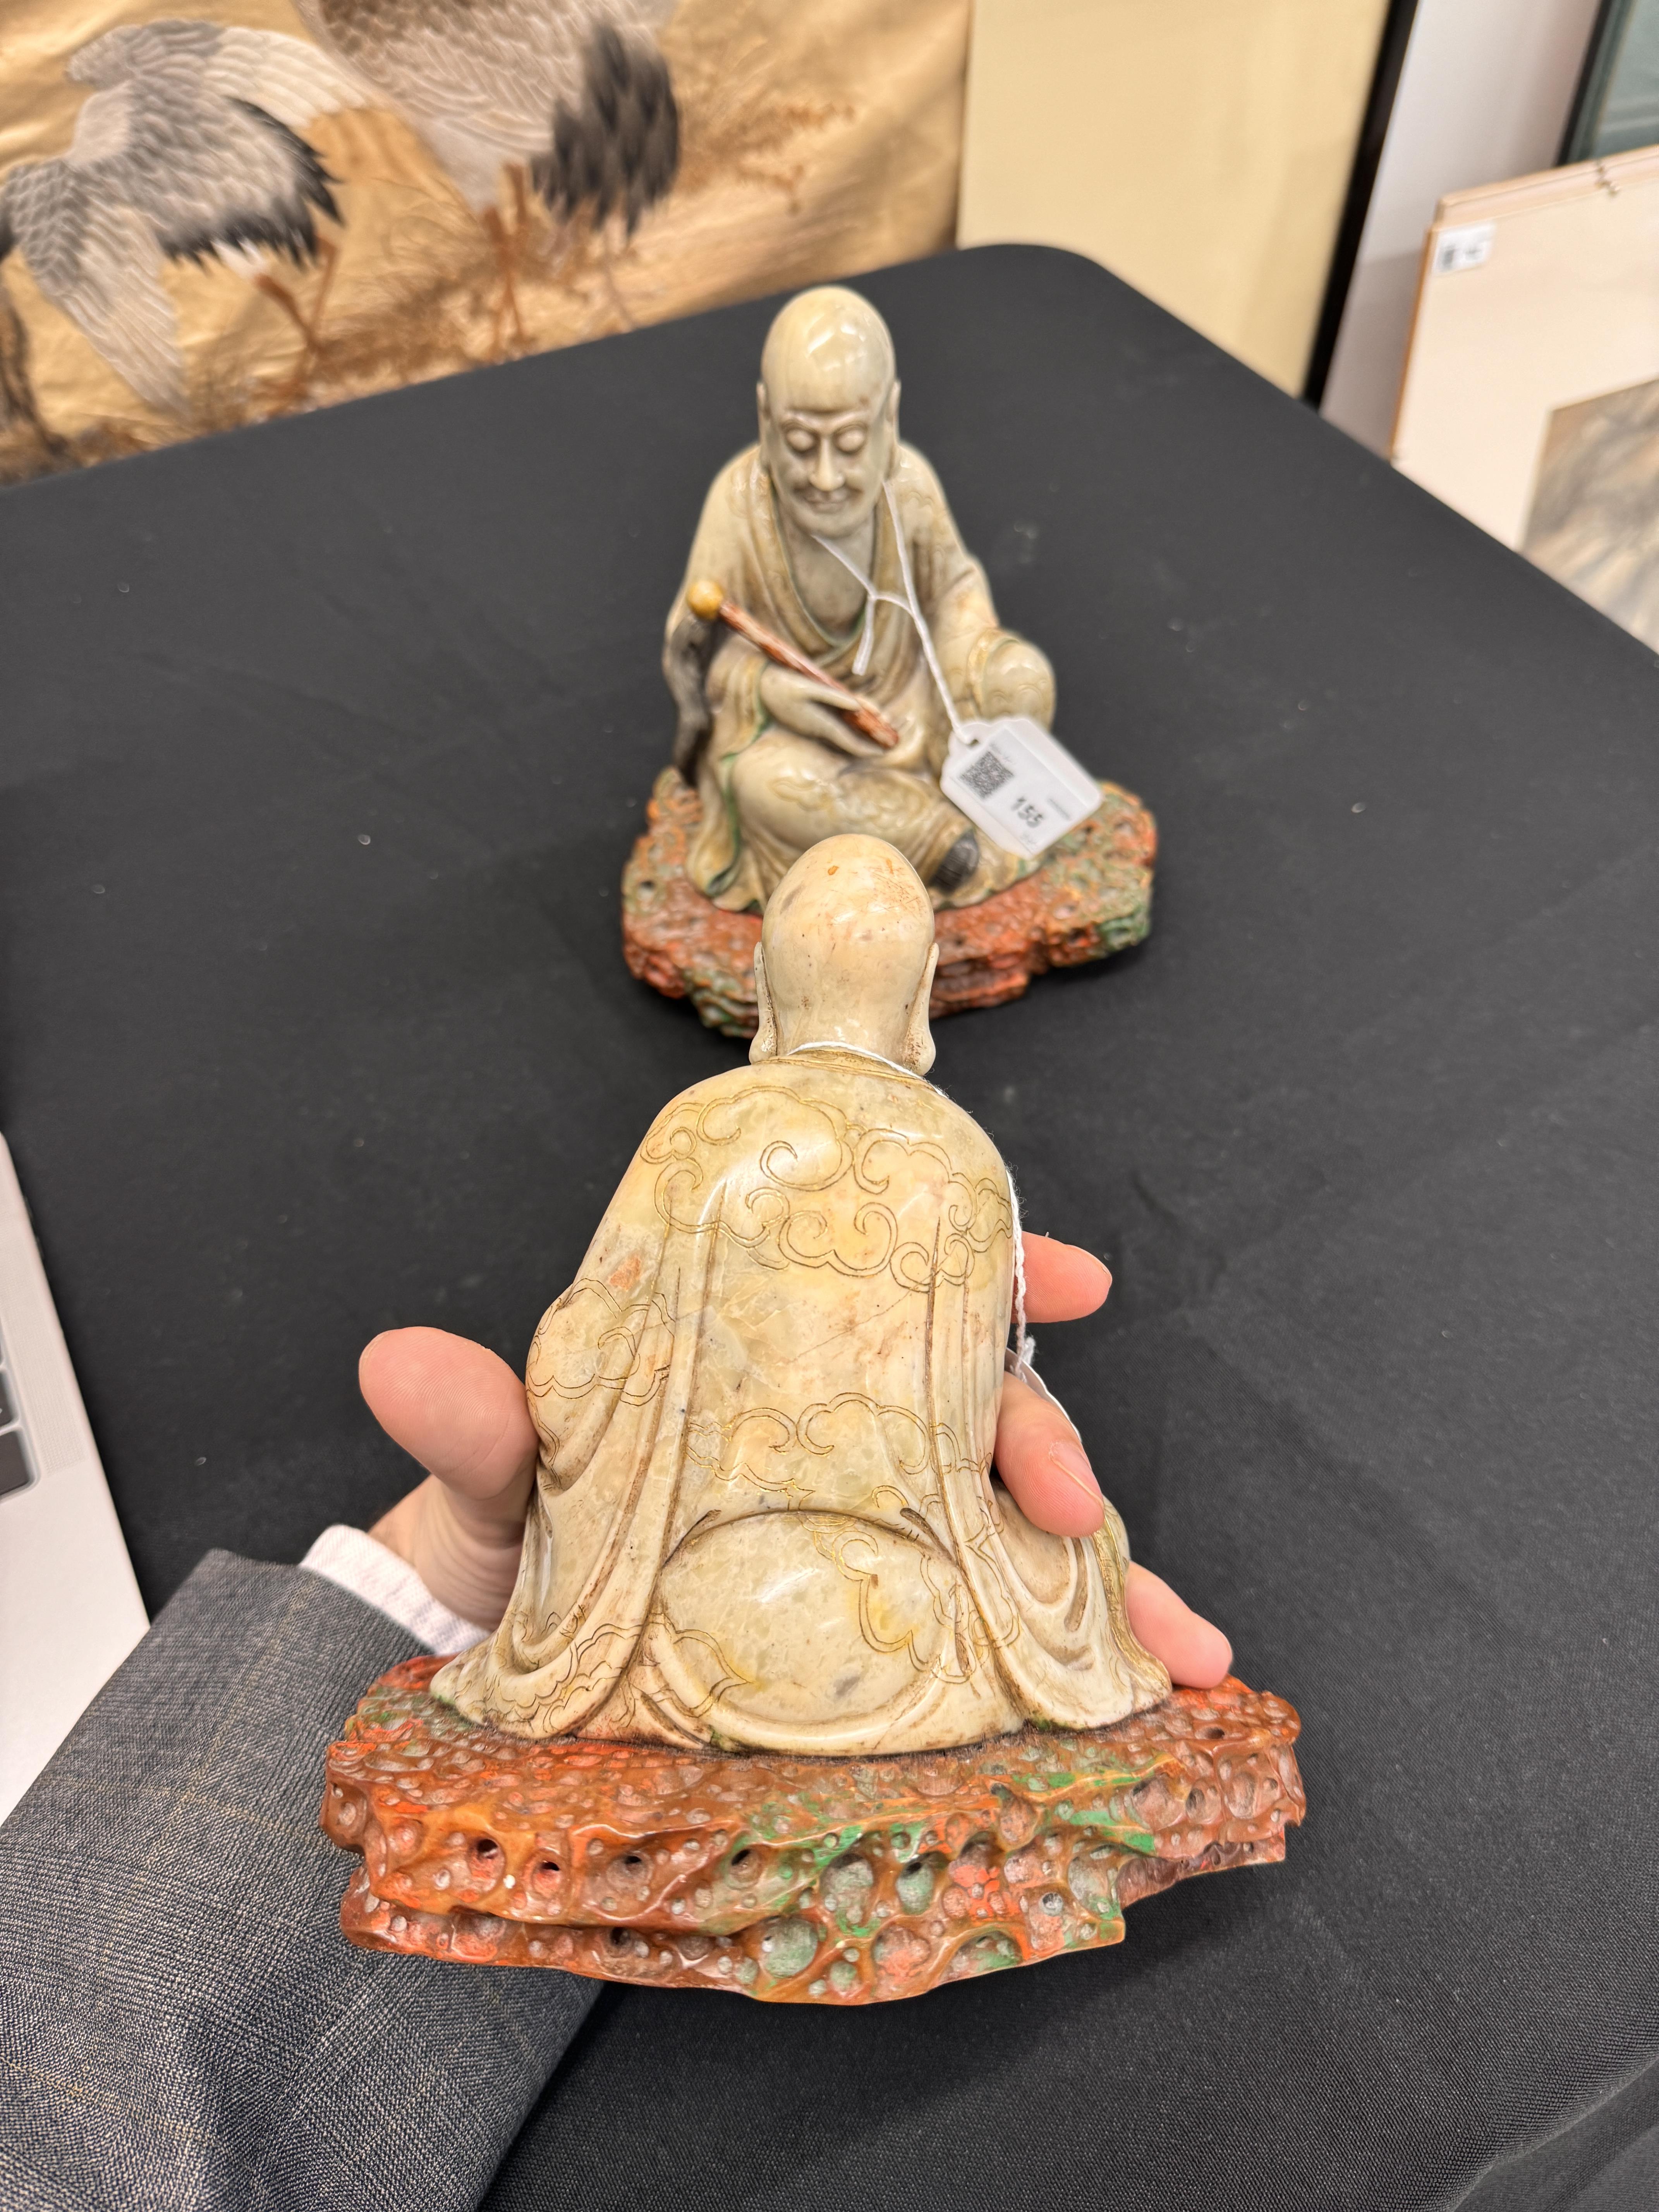 A PAIR OF FINE CHINESE SOAPSTONE 'LUOHAN' FIGURES 清康熙 壽山石羅漢坐像一對 - Image 15 of 24